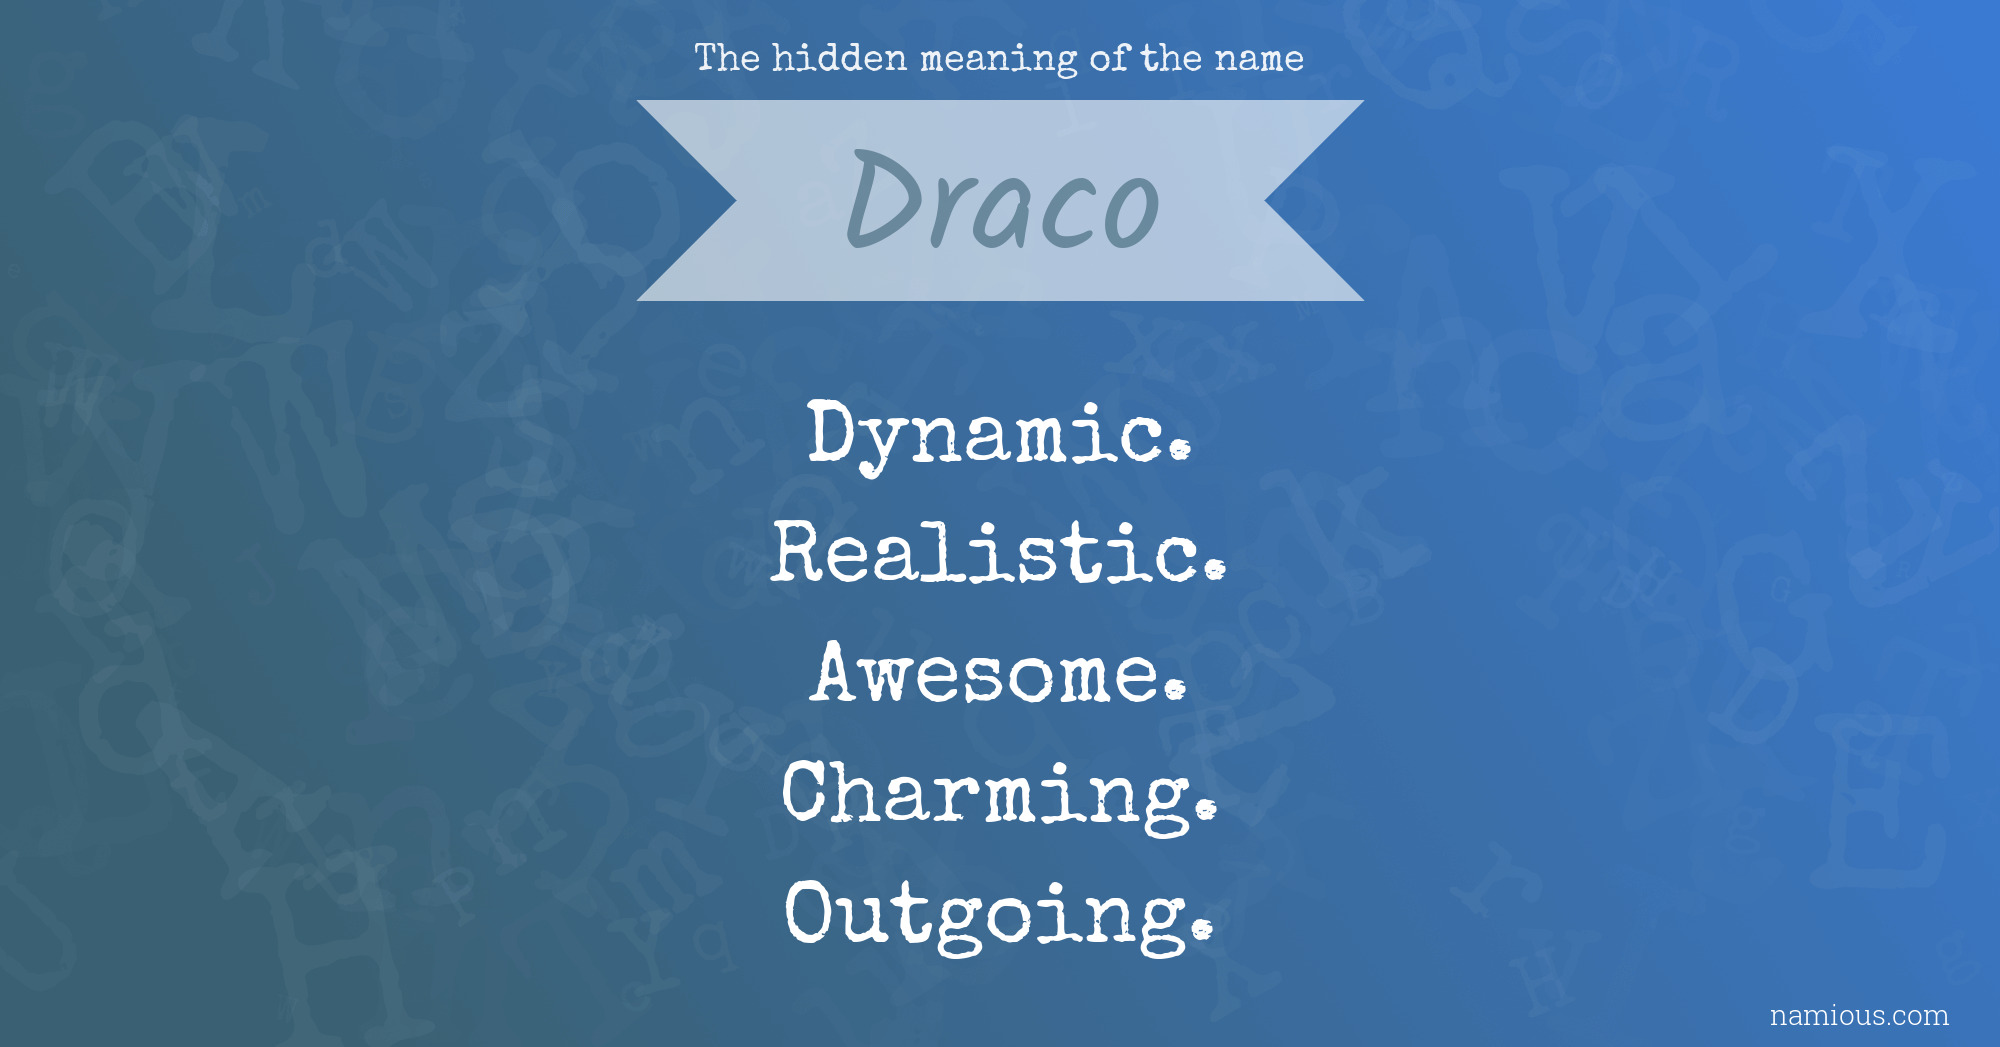 The hidden meaning of the name Draco